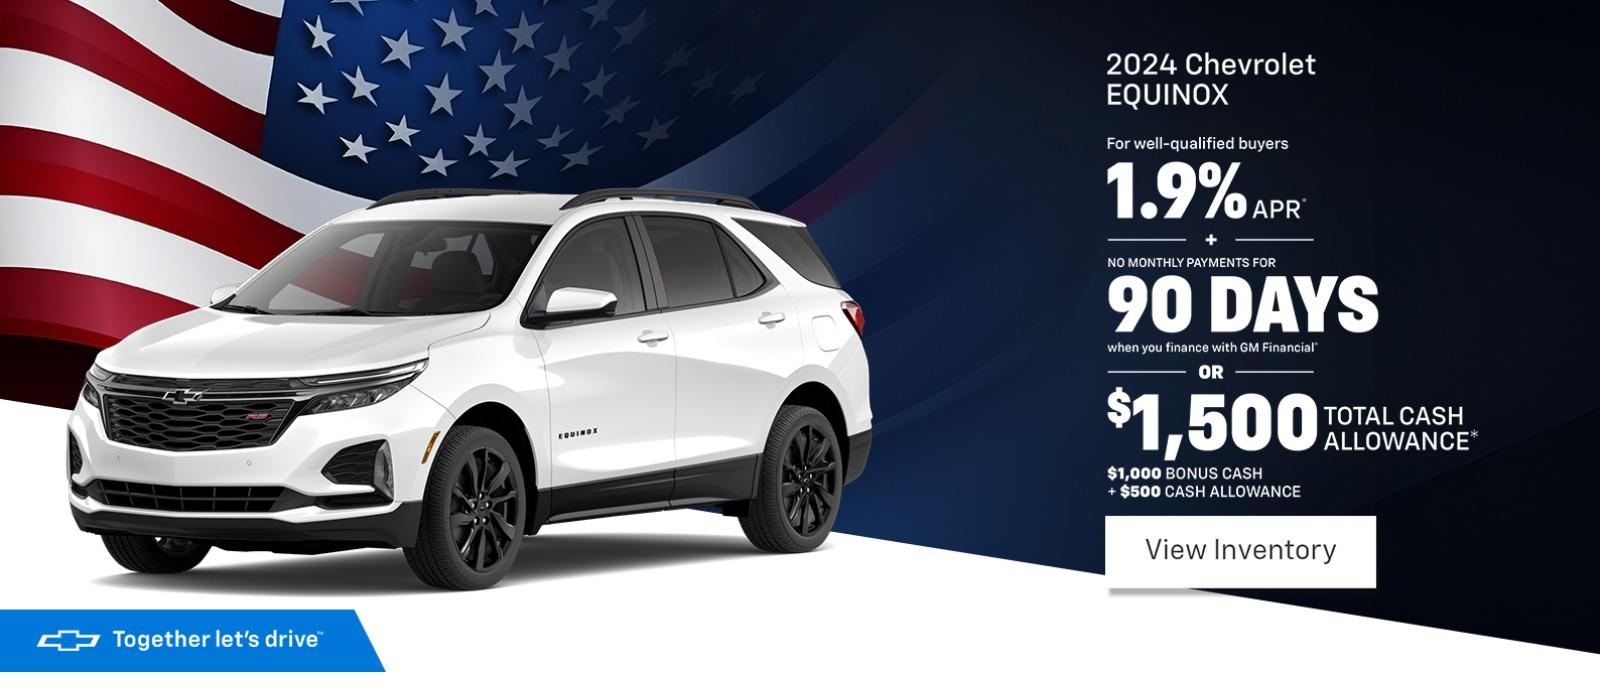 2024 Chevrolet EQUINOX For well-qualified buyers 1.9% APR* NO MONTHLY PAYMENTS FOR 90 DAYS when you finance with GM Financial OR $1,500 $1,000 BONUS CASH + $500 CASH ALLOWANCE TOTAL CASH ALLOWANCE